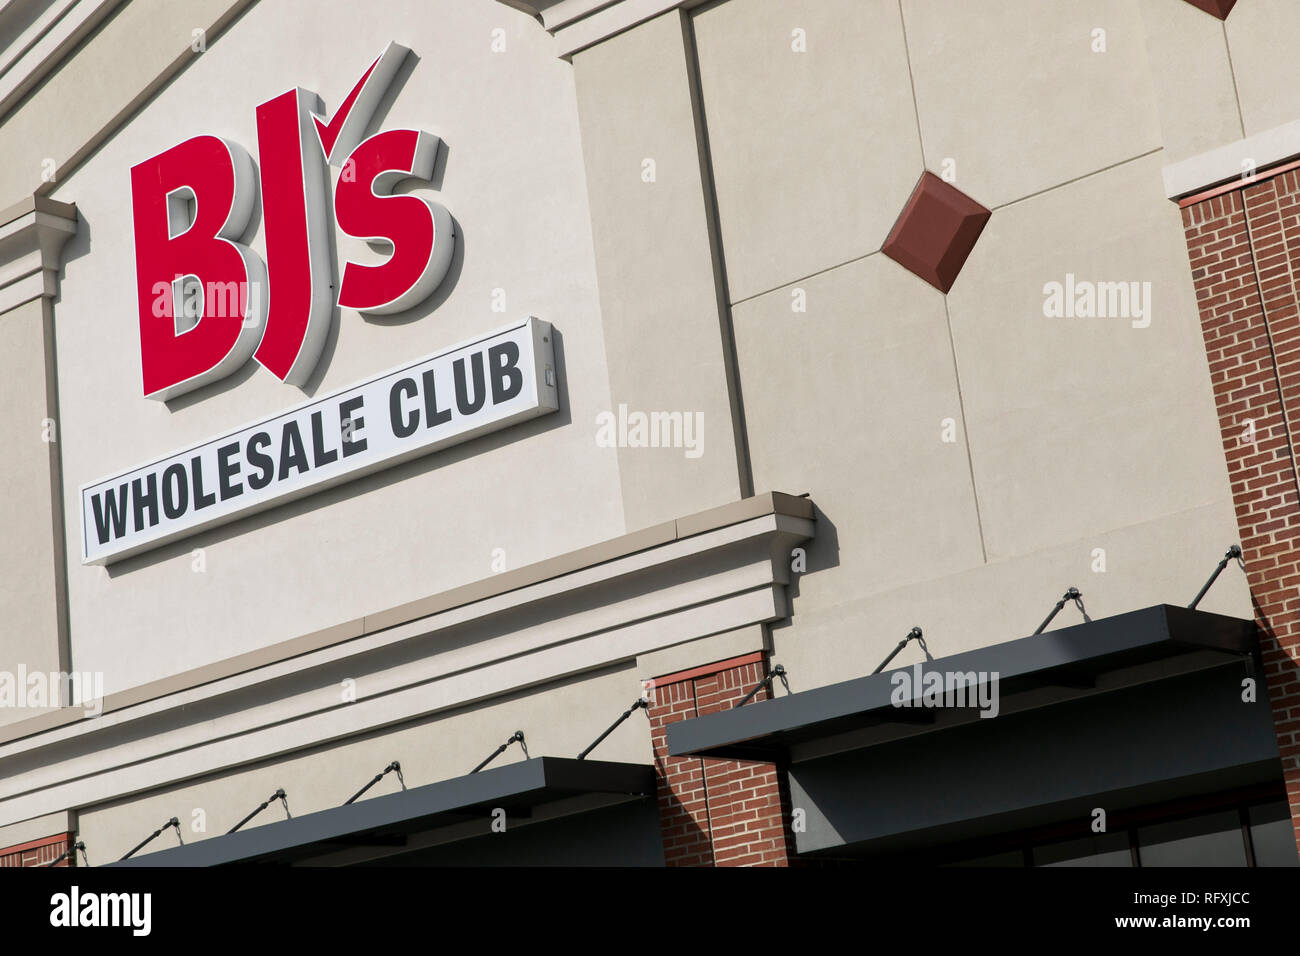 A logo sign outside of a BJ's Wholesale Club location in Chambersburg, Pennsylvania on January 25, 2019. Stock Photo